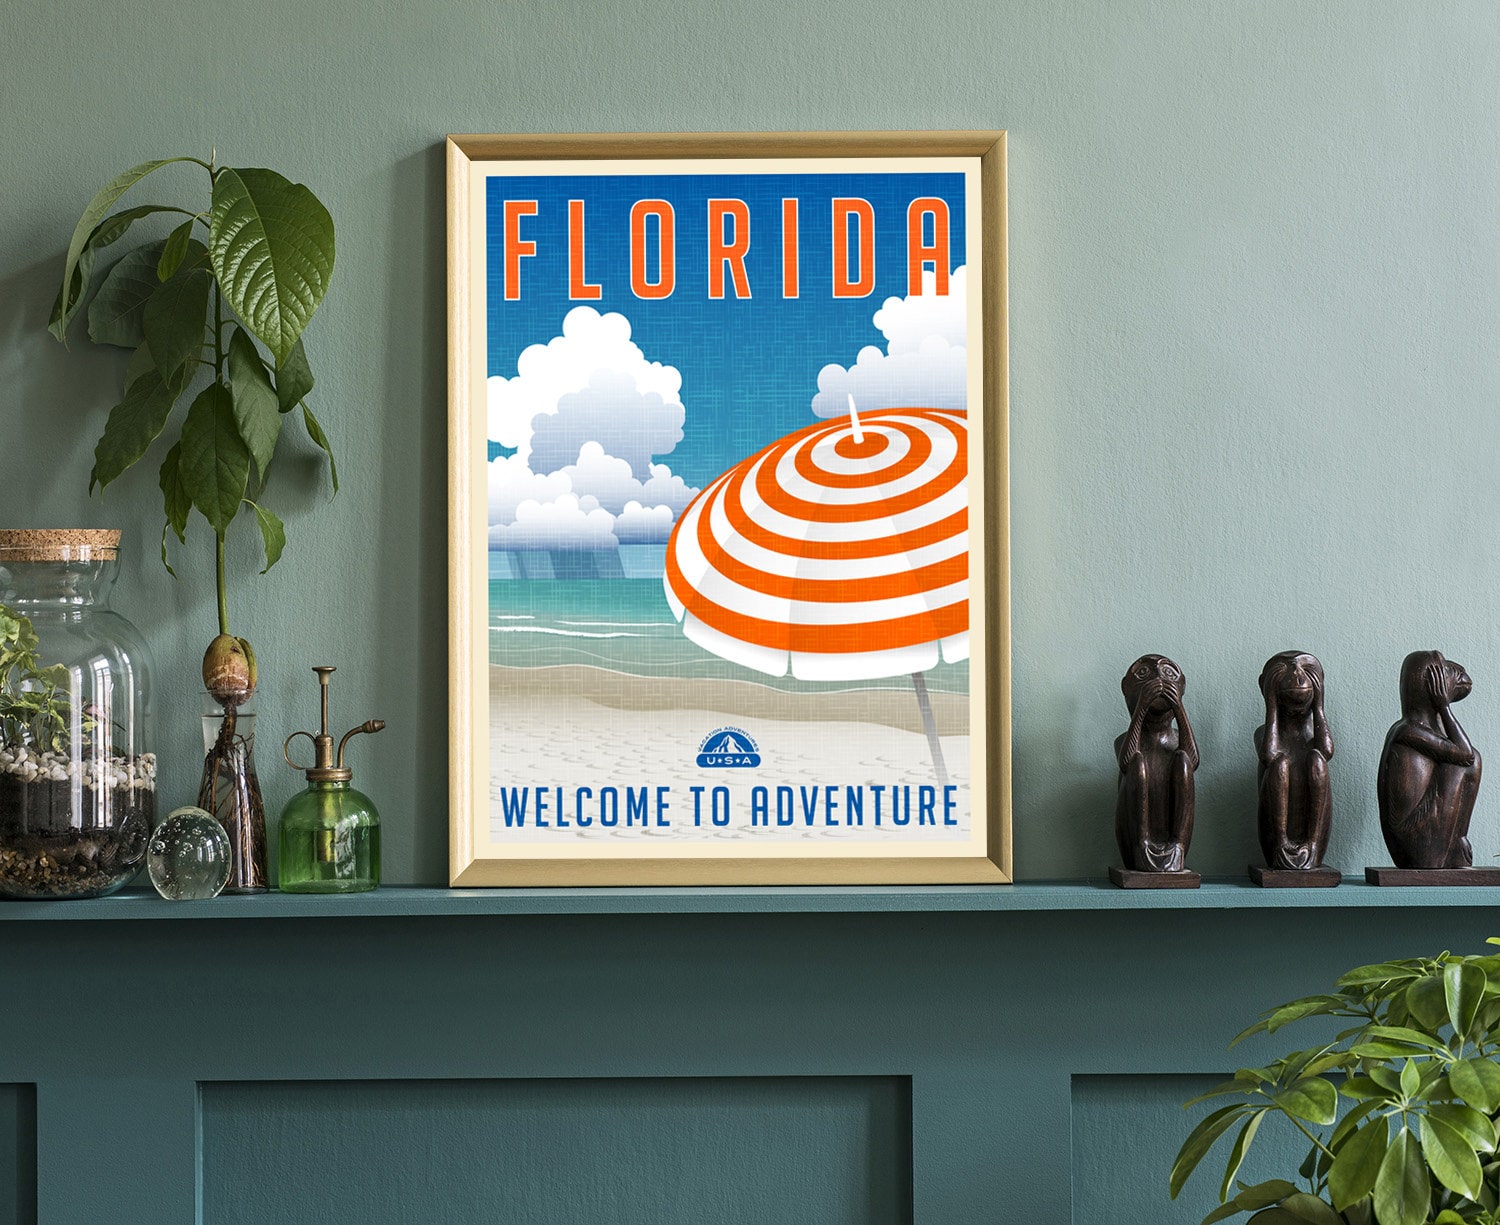 FLORIDA retro style travel poster, Florida vintage rustic poster print, Home wall art, Office wall decorations, Florida state map posters